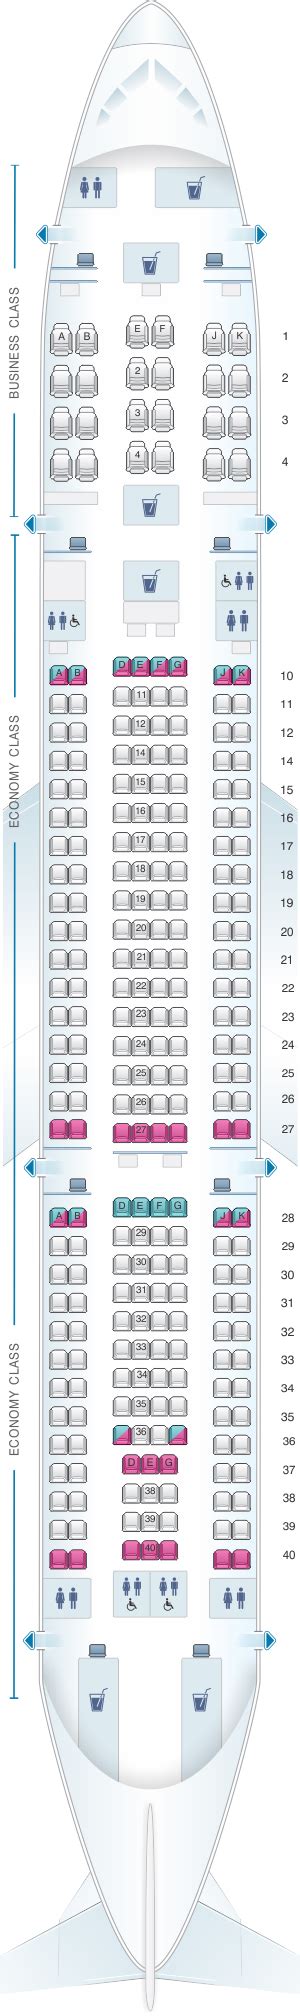 Learn About Imagen Qatar Airways Select Seat In Thptnganamst Edu Vn